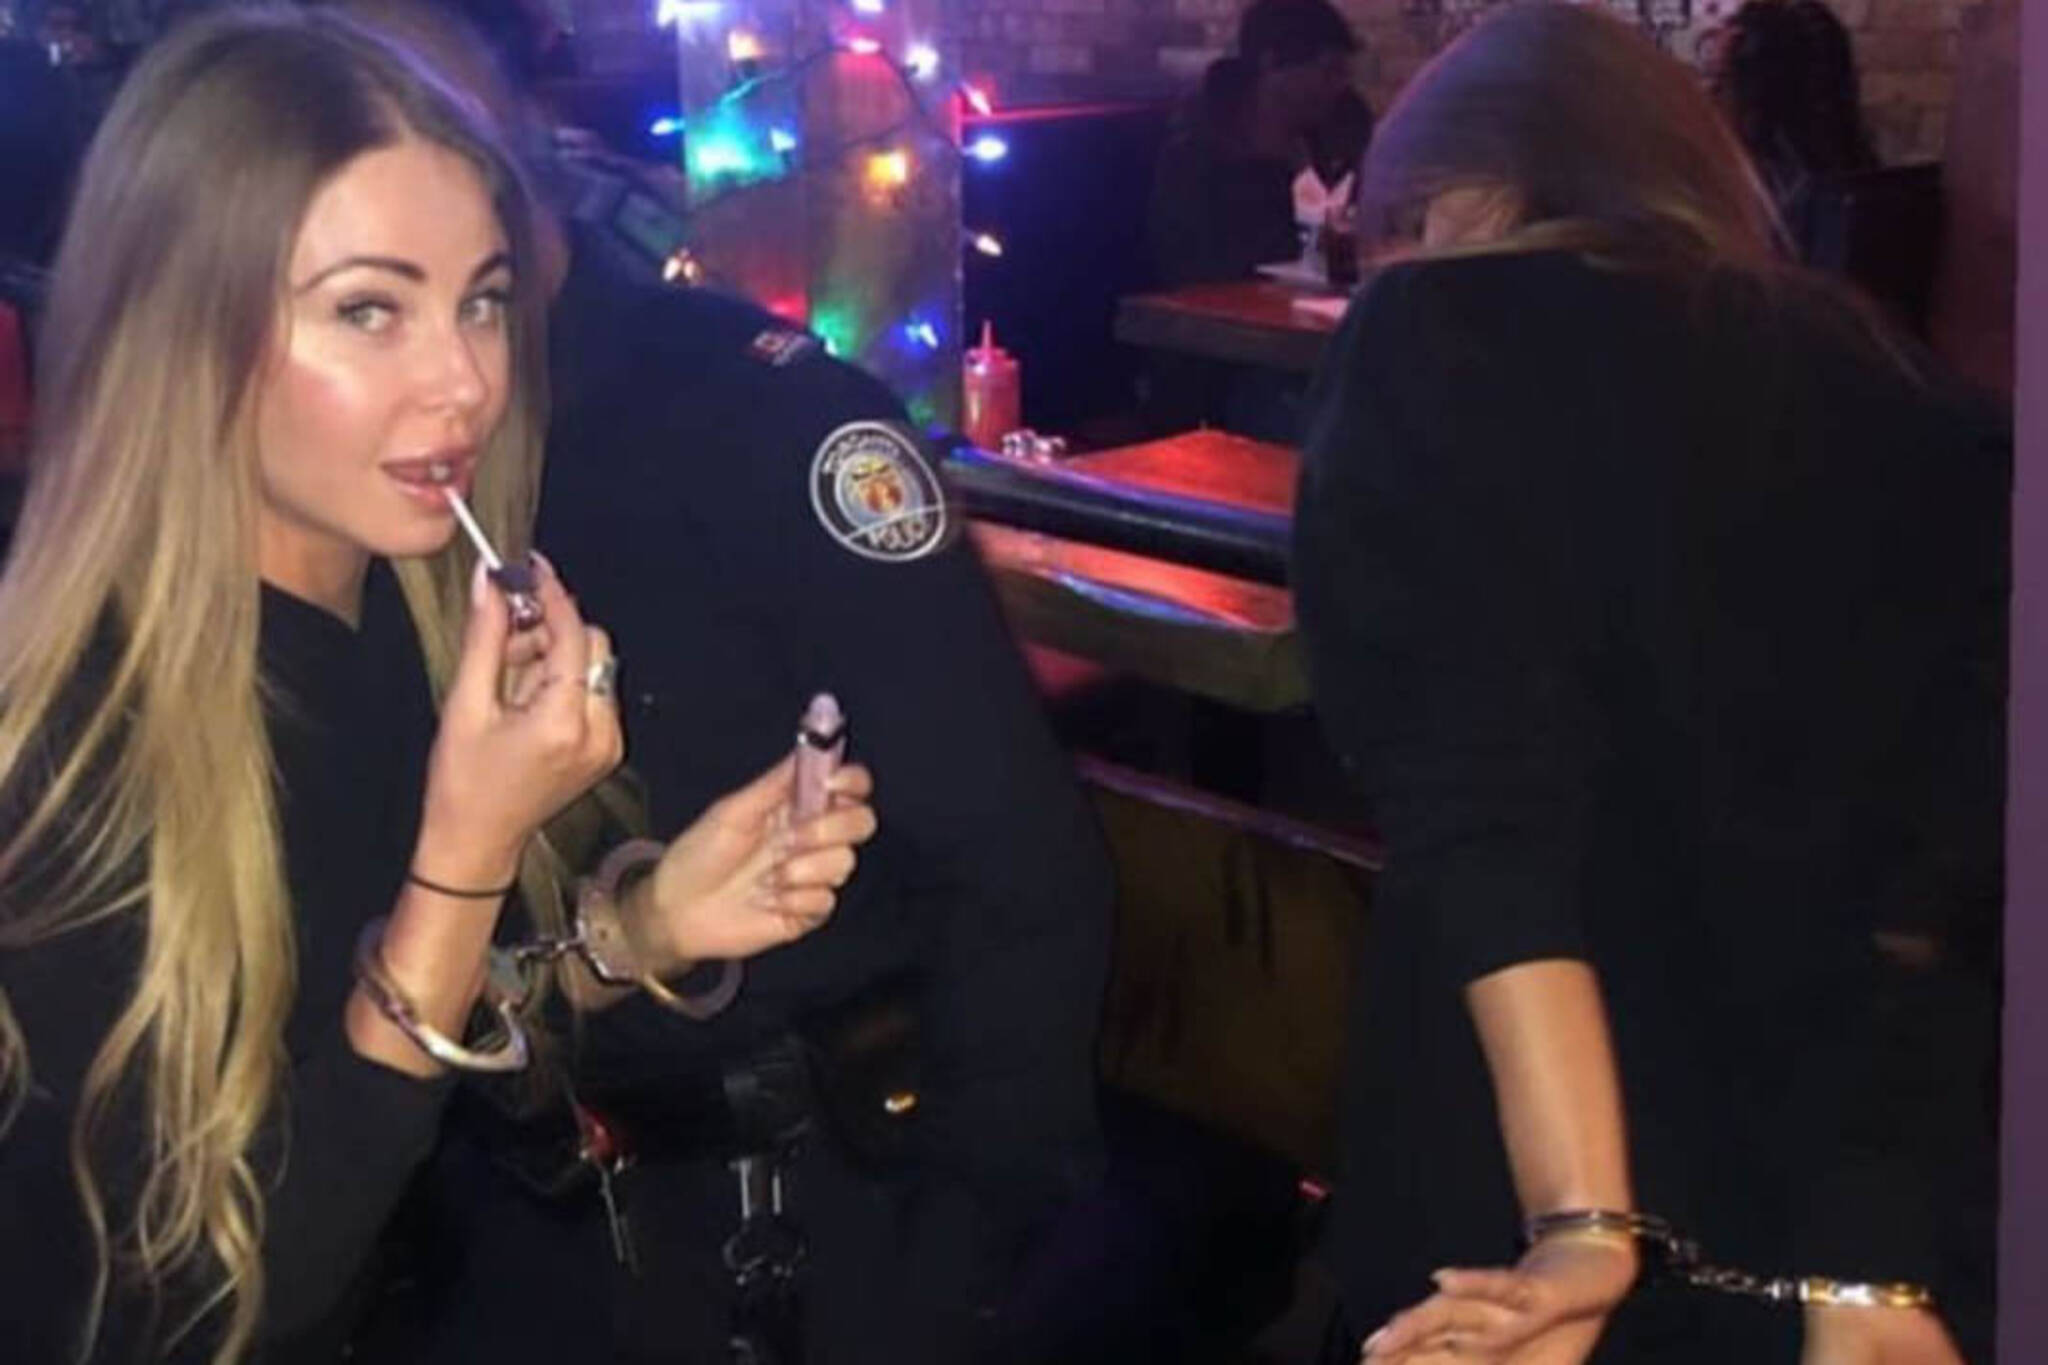 Toronto Police Caught On Video Behaving Badly At Downtown Bar